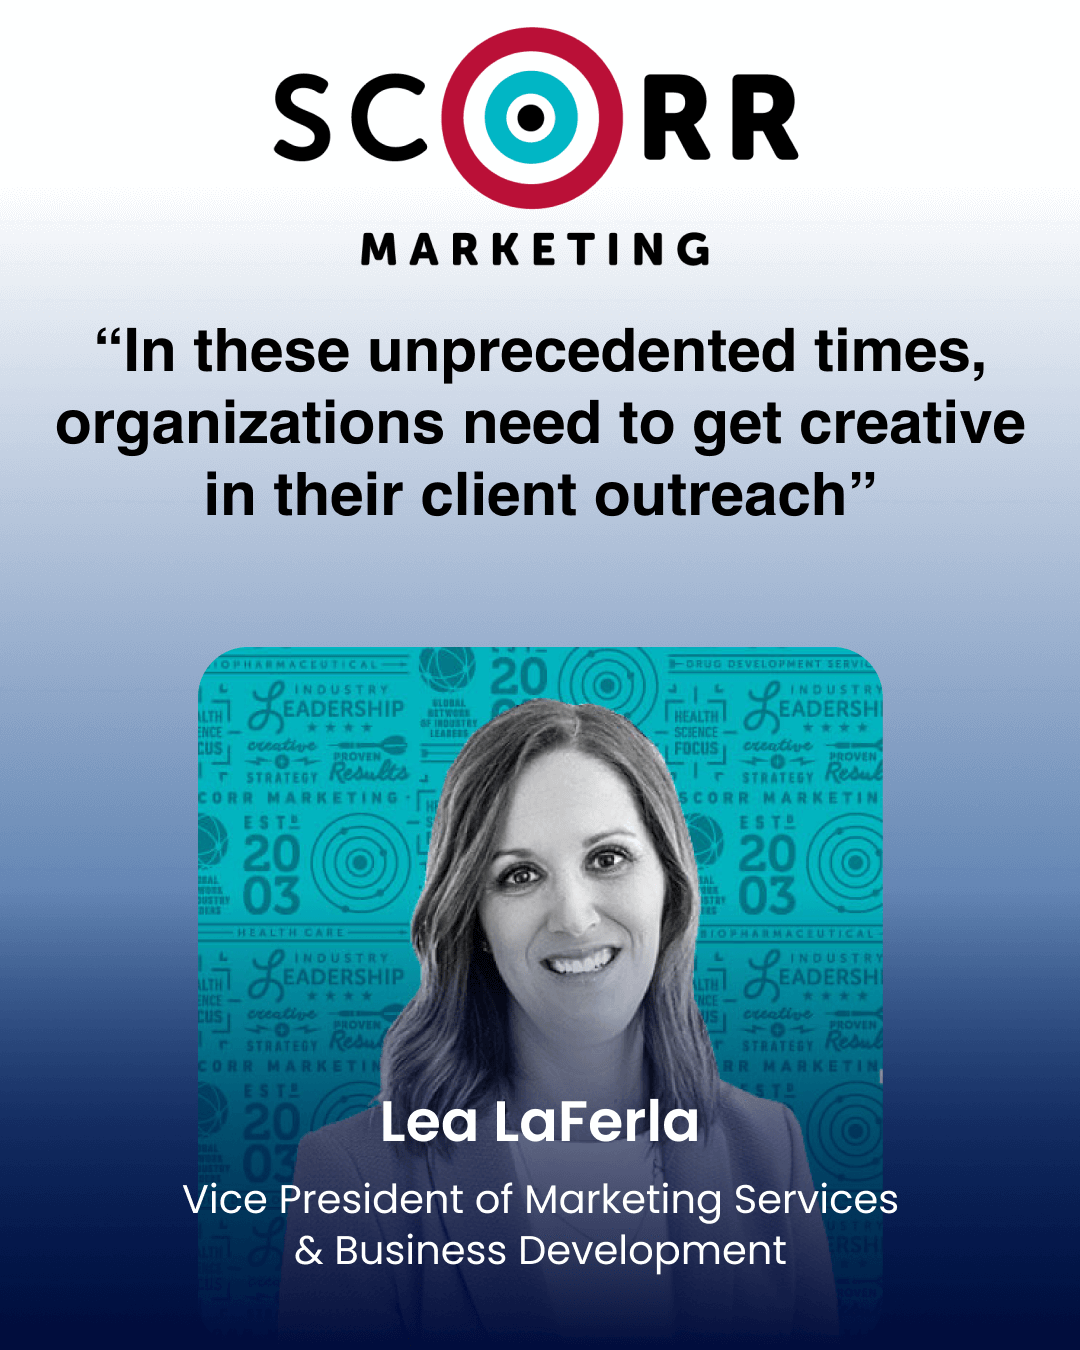 “In these unprecedented times, organizations need to get creative in their client outreach”